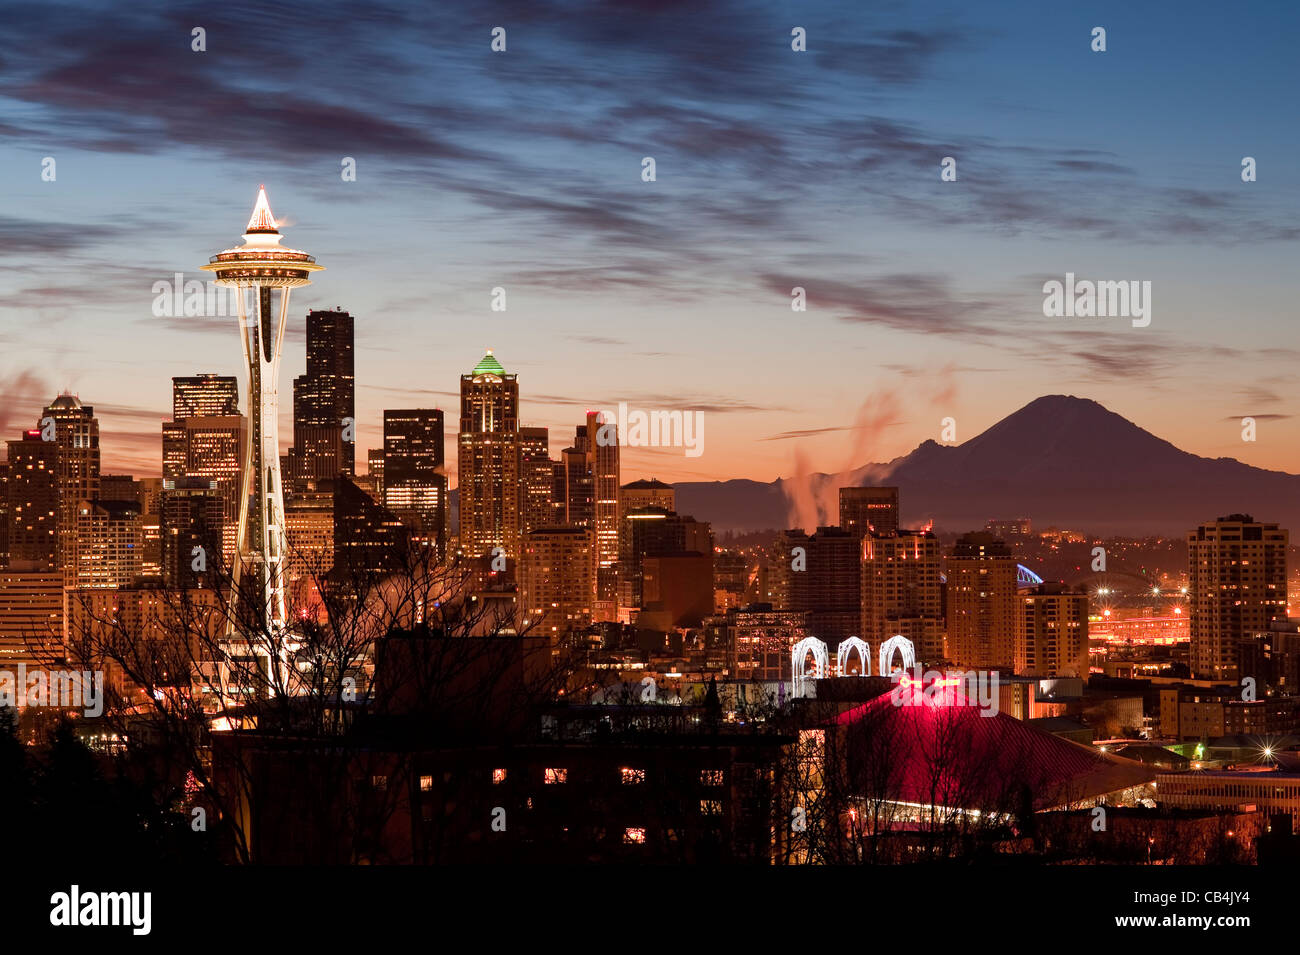 Retro Image of Seattle and Mount Rainier at sunrise with city lights. Stock Photo